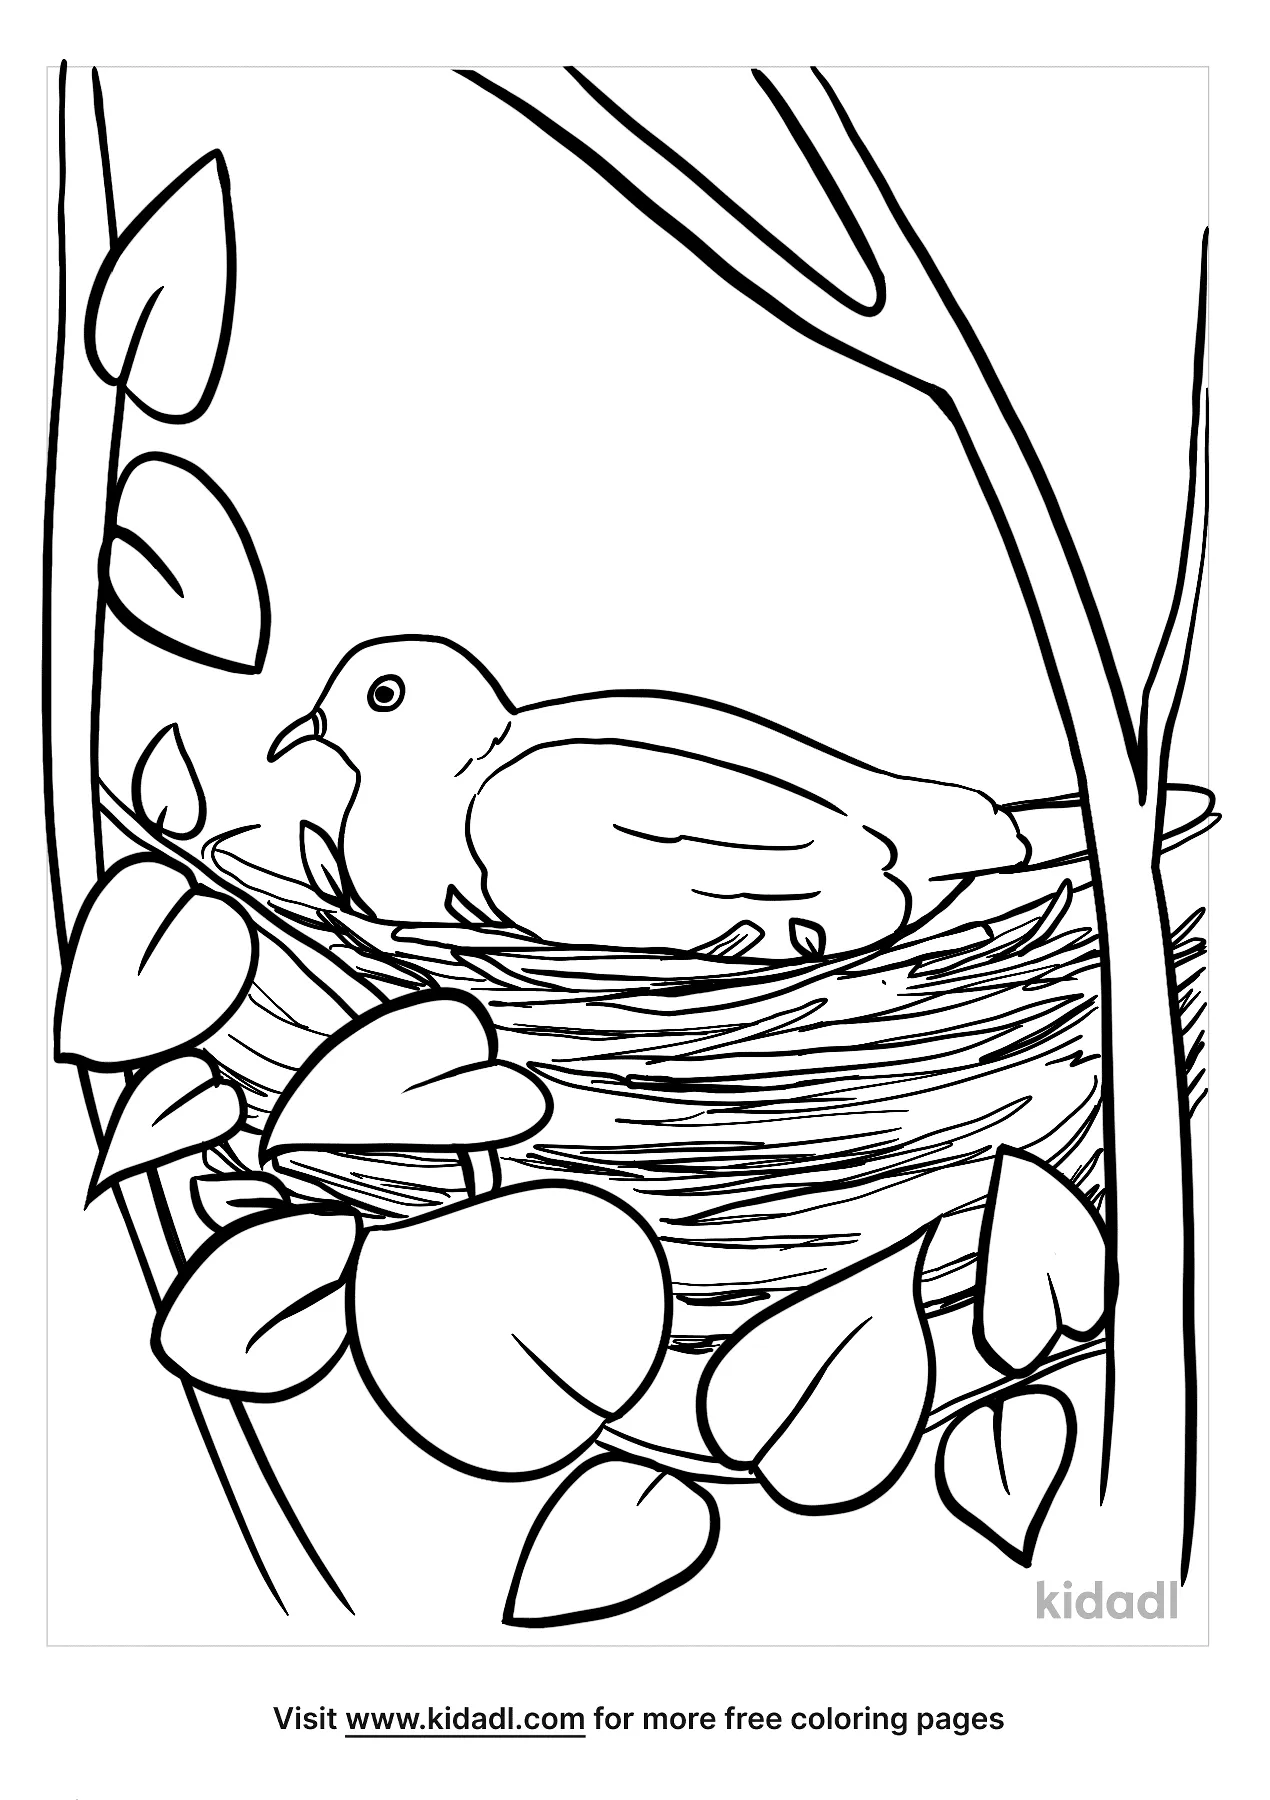 Bird Nest Coloring Pages   Free Birds Coloring Pages   Kidadl